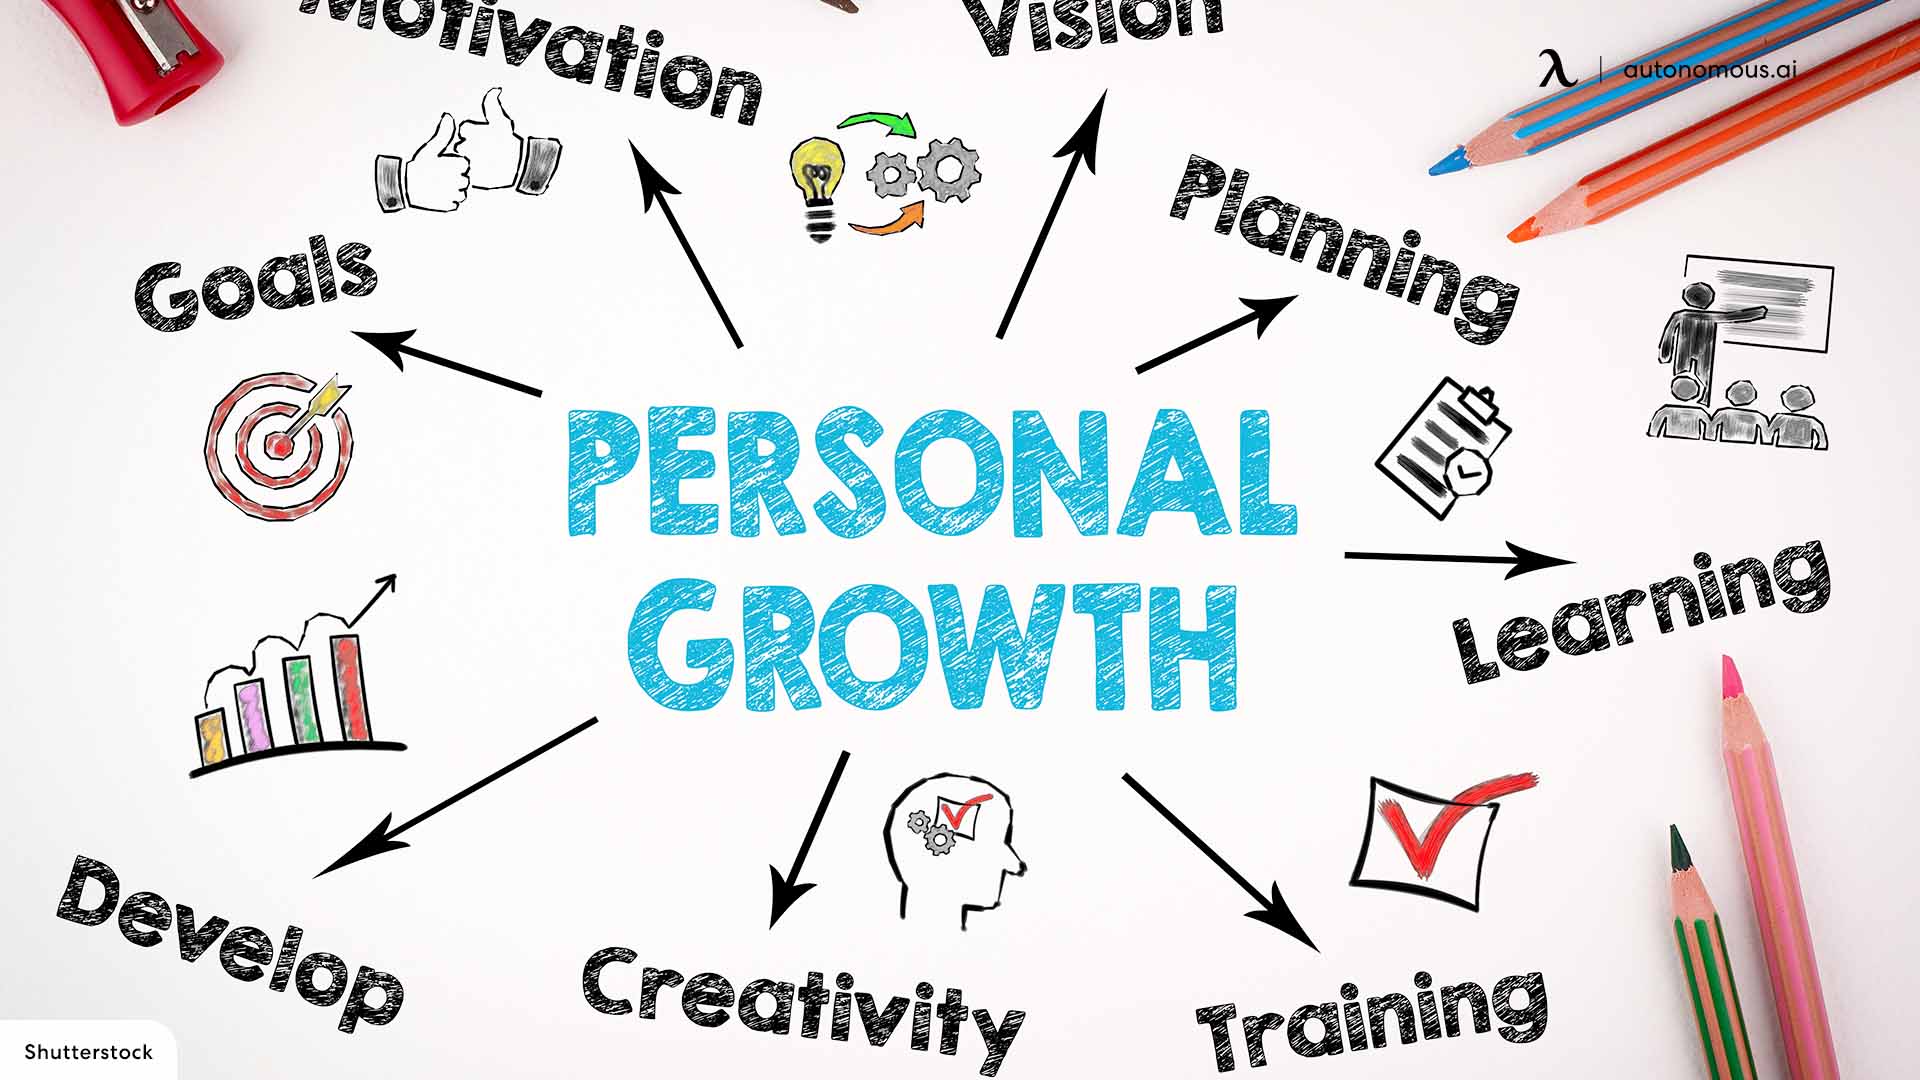 Provide opportunities for professional growth